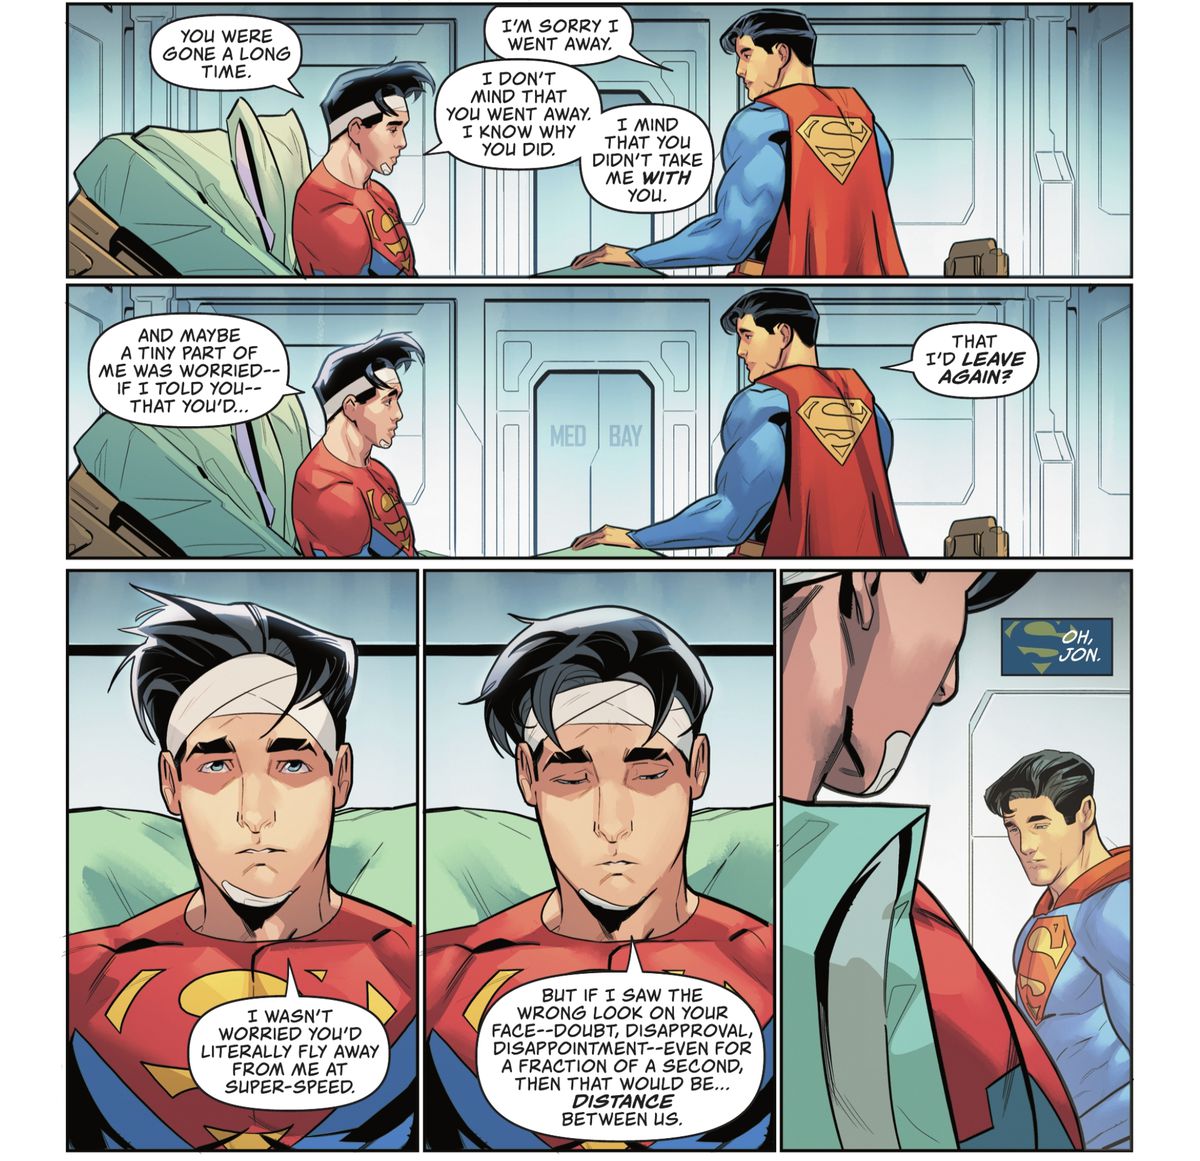 In a hospital bed, with his head bandaged, Jon/Superman tells Clark/Superman that he was gone a long time. And a small part of him was worried that if he told him that he was queer and “saw the wrong look on your face — doubt, disapproval, disappointment — even for a second, then that would be... distance between us,” in Superman: Son of Kal-El #17 (2022). 